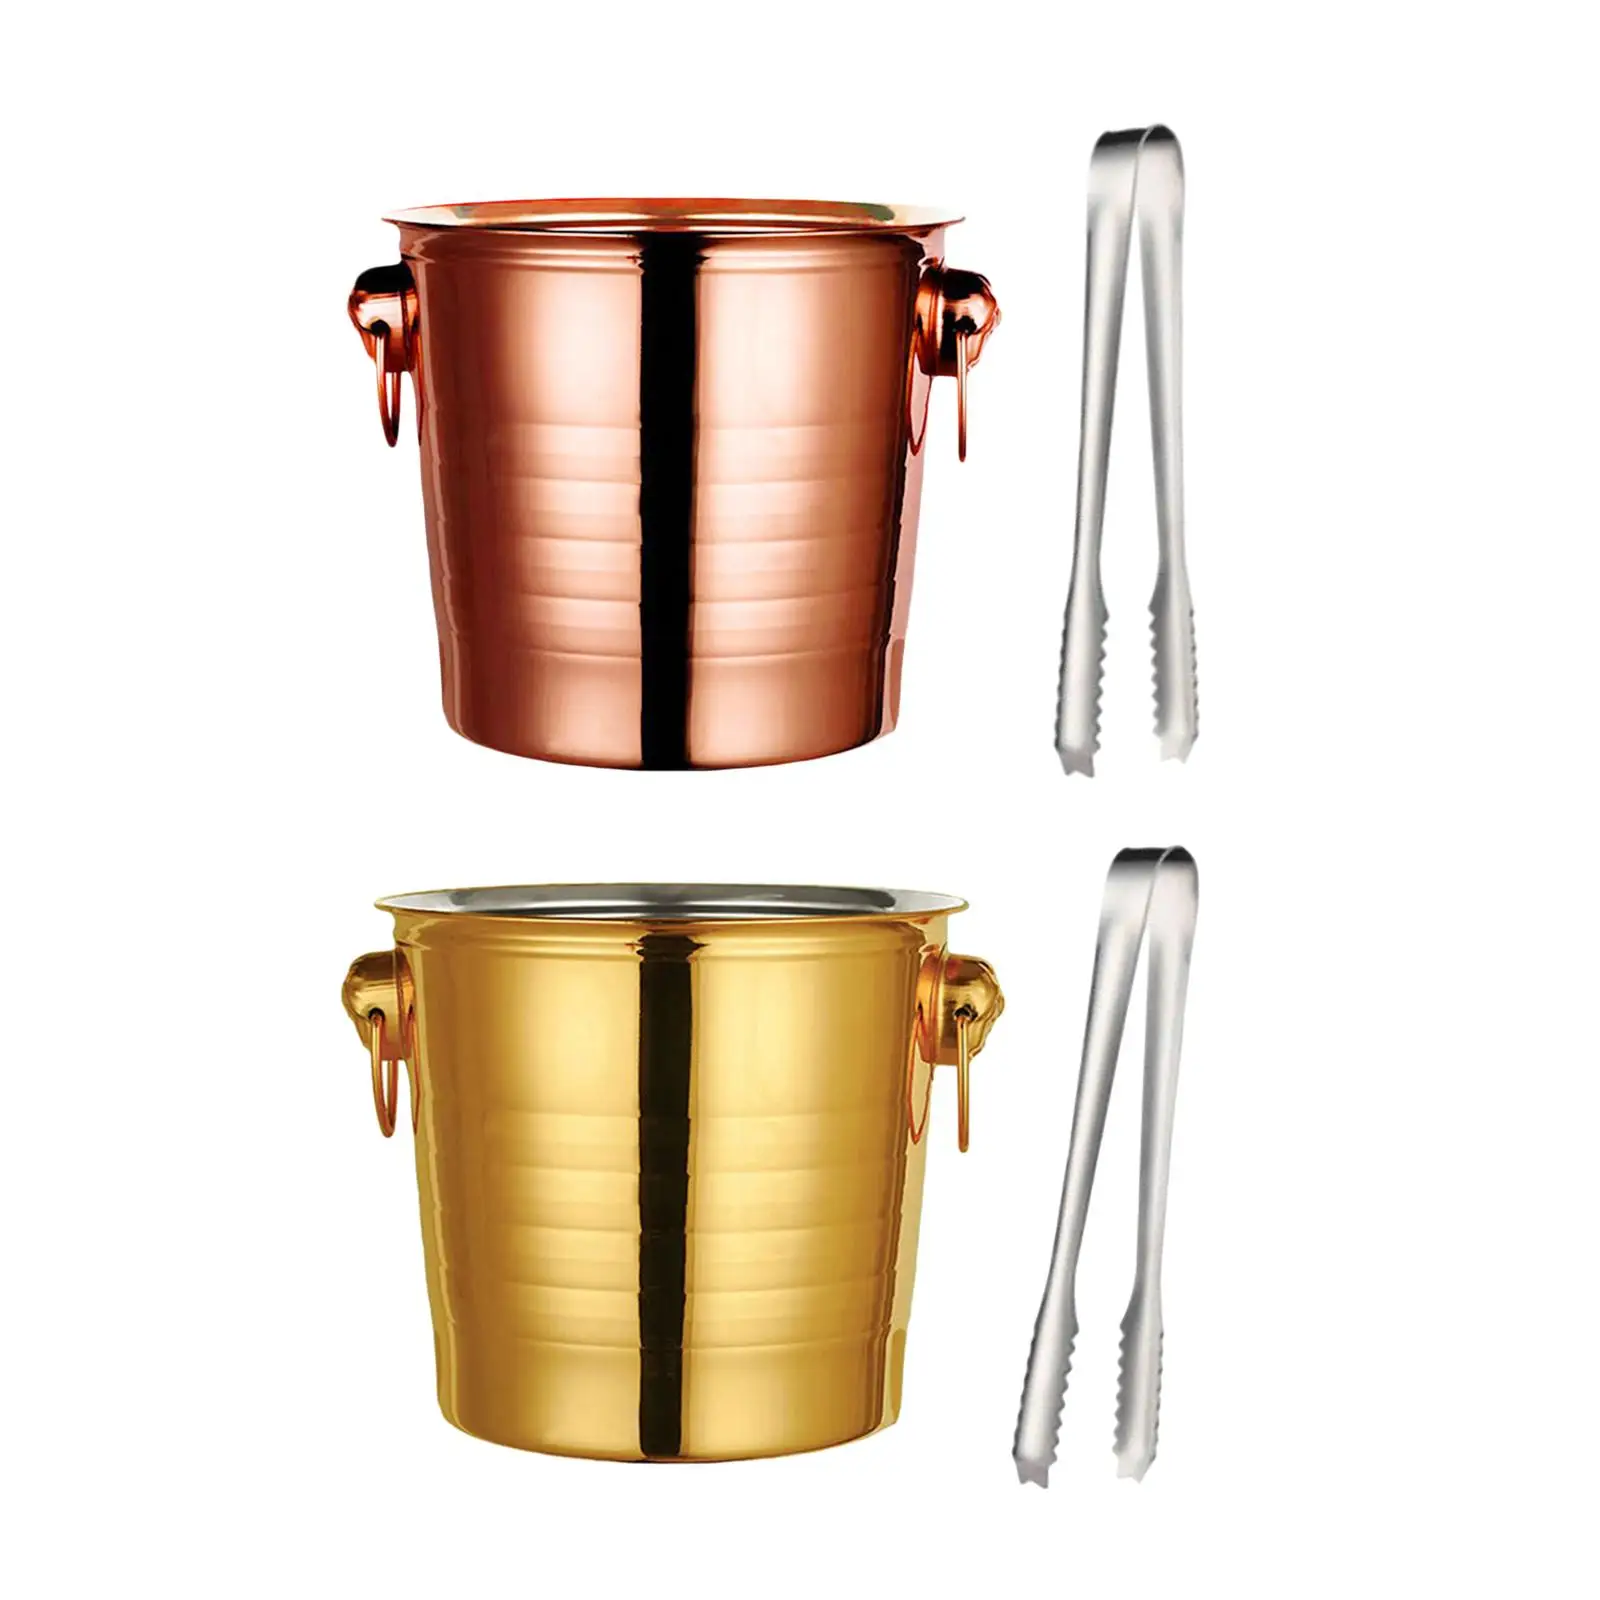 Stainless Steel Ice Bucket, with Ice Cube Clip, Drinks Chilling Bucket with Handles, Beverage Chilling Bucket for Parties BBQ